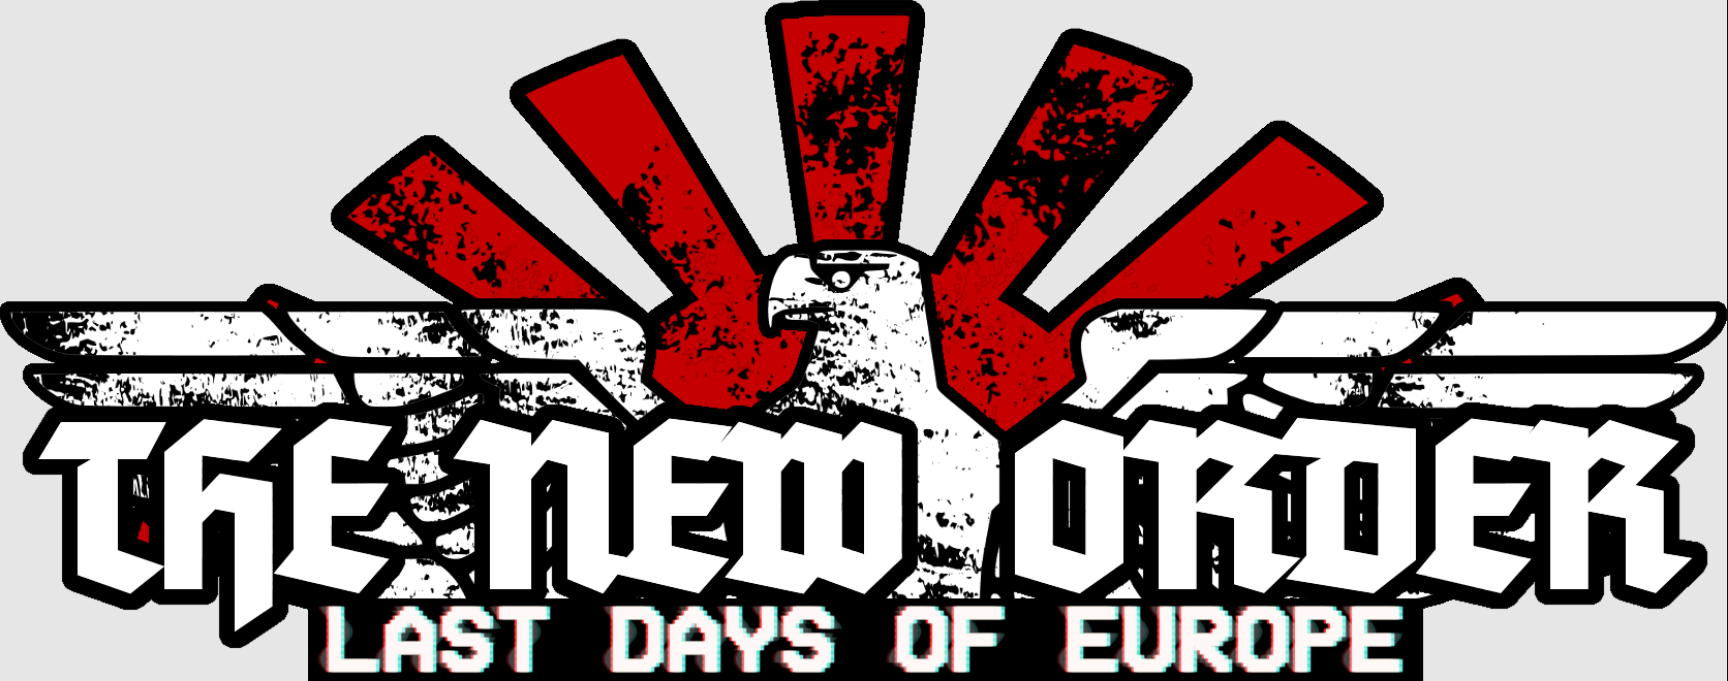 The New order last Days of Europe. TNO логотип. The New order last Days of Europe логотип. The New order hoi4 logo. Мод the new order